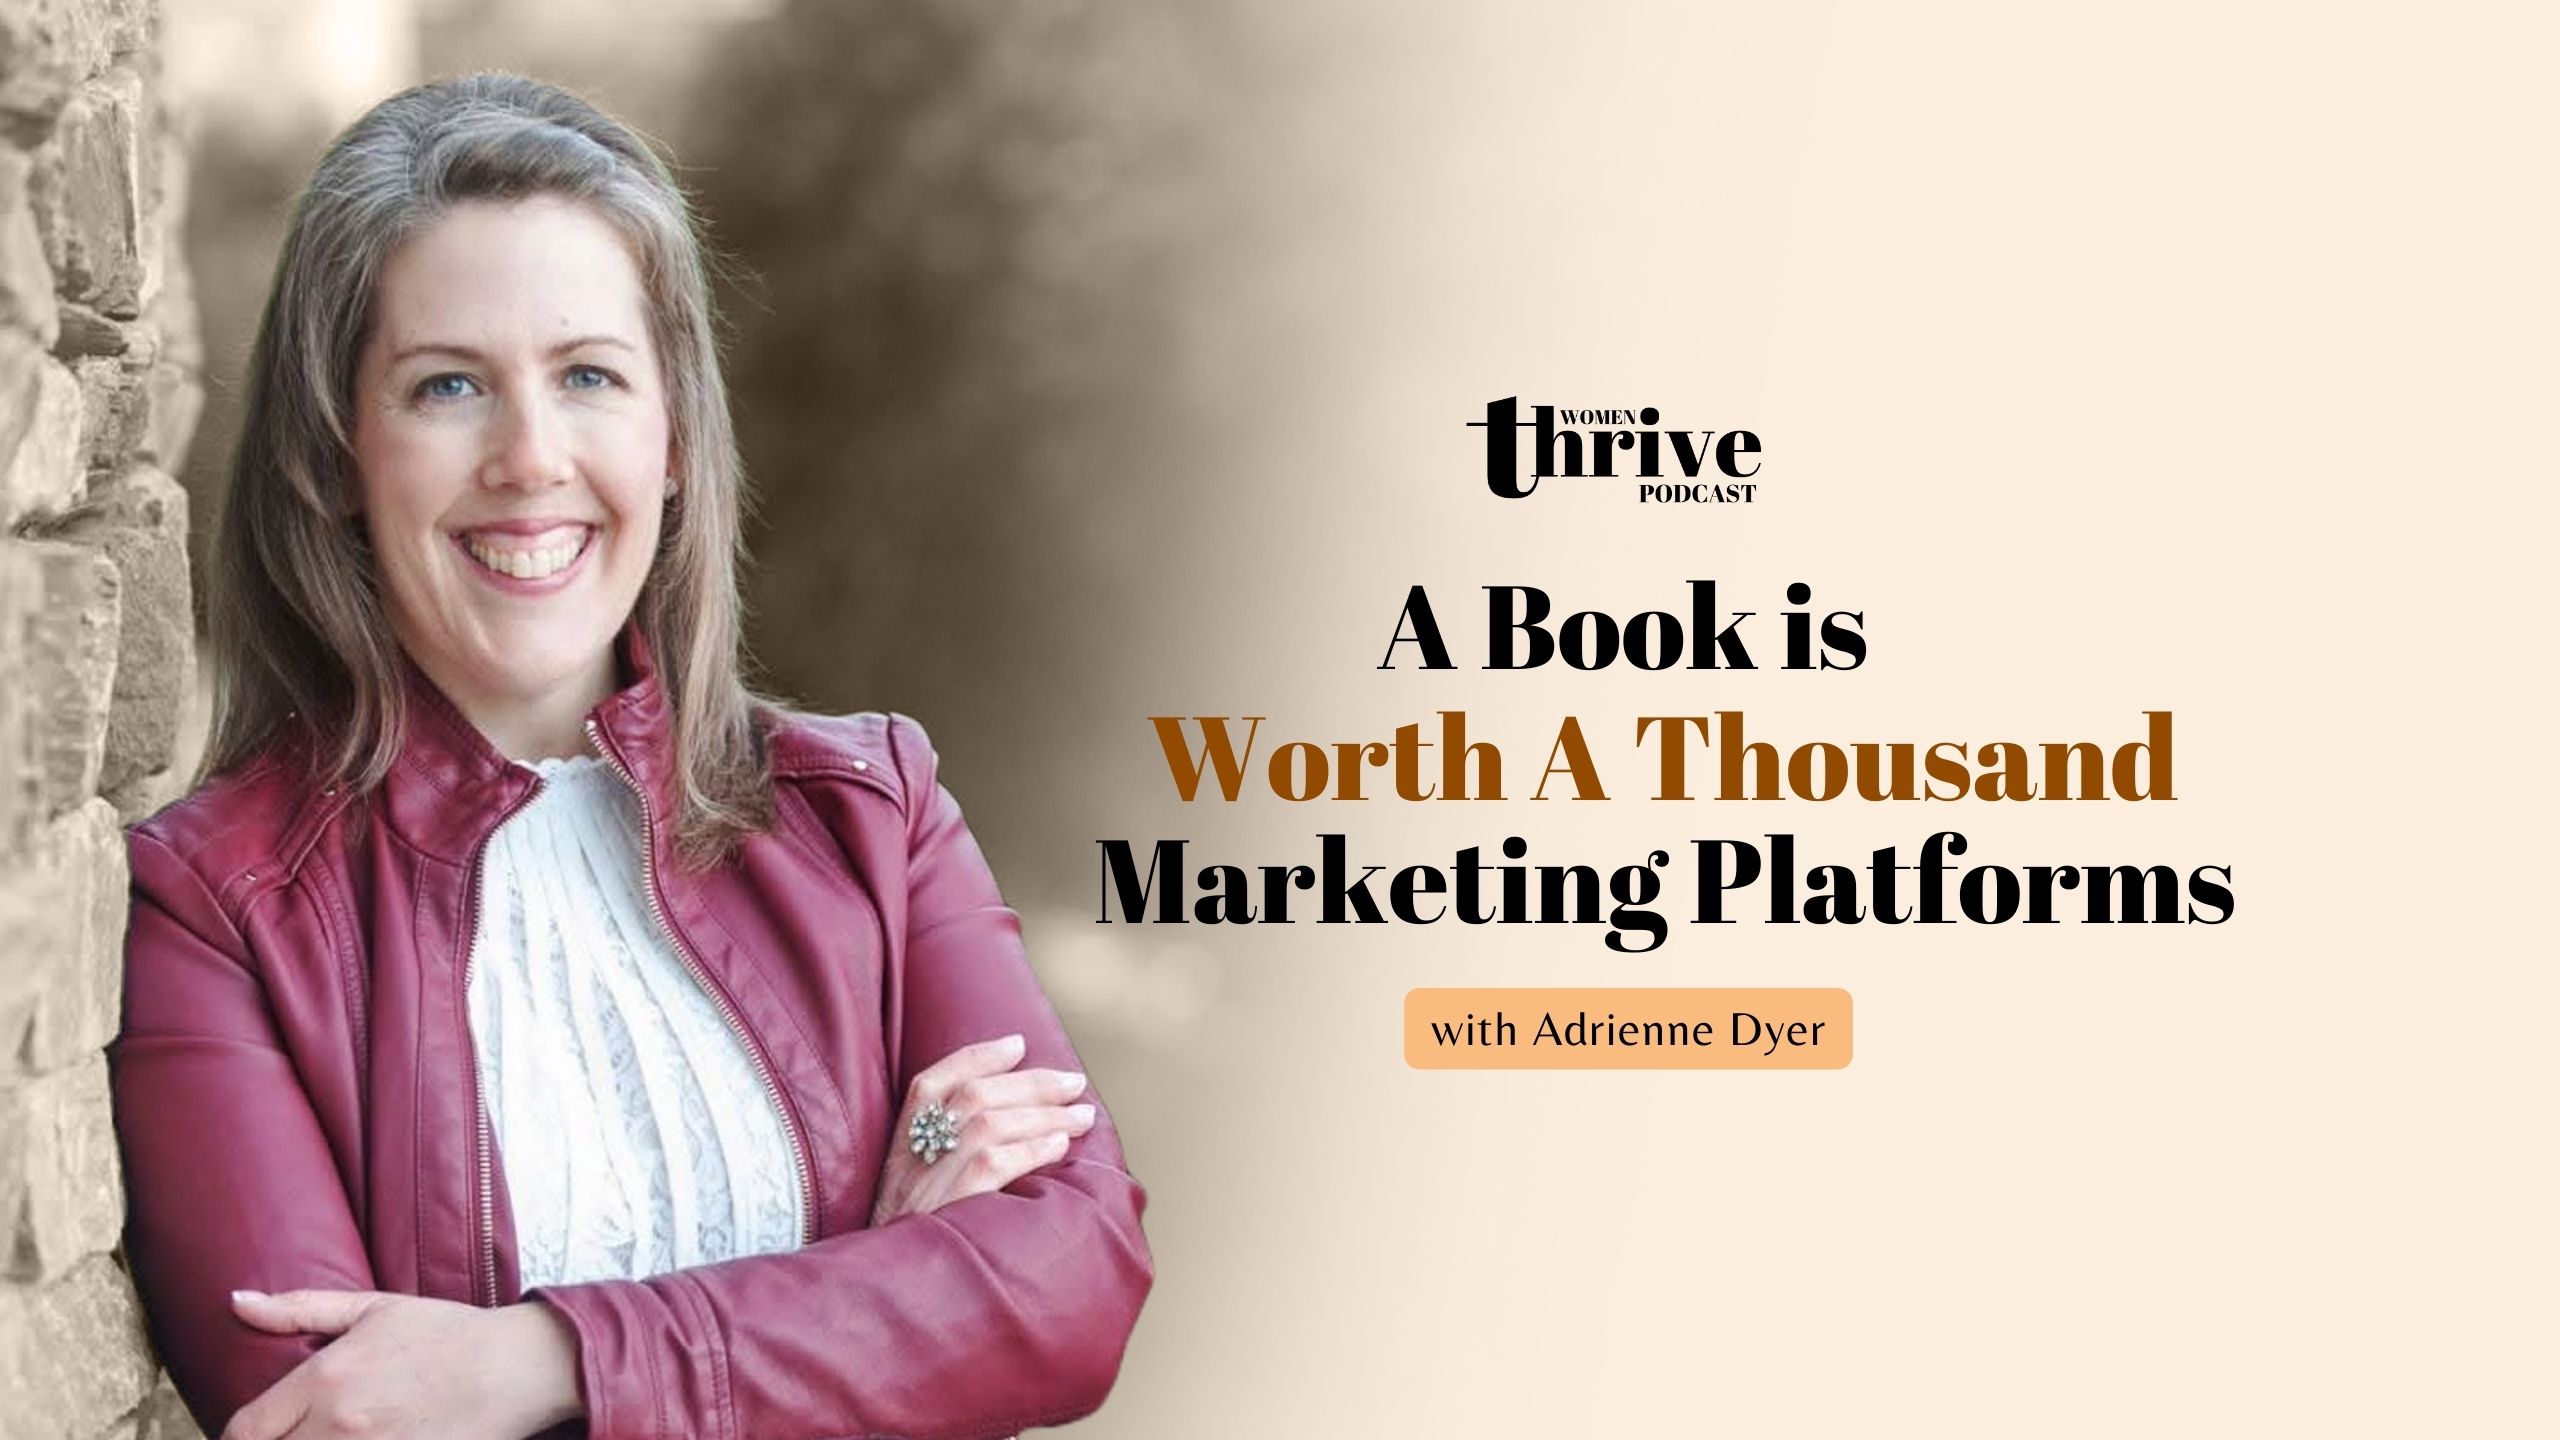 A Book is Worth a Thousand Marketing Platforms with Adrienne Dyer